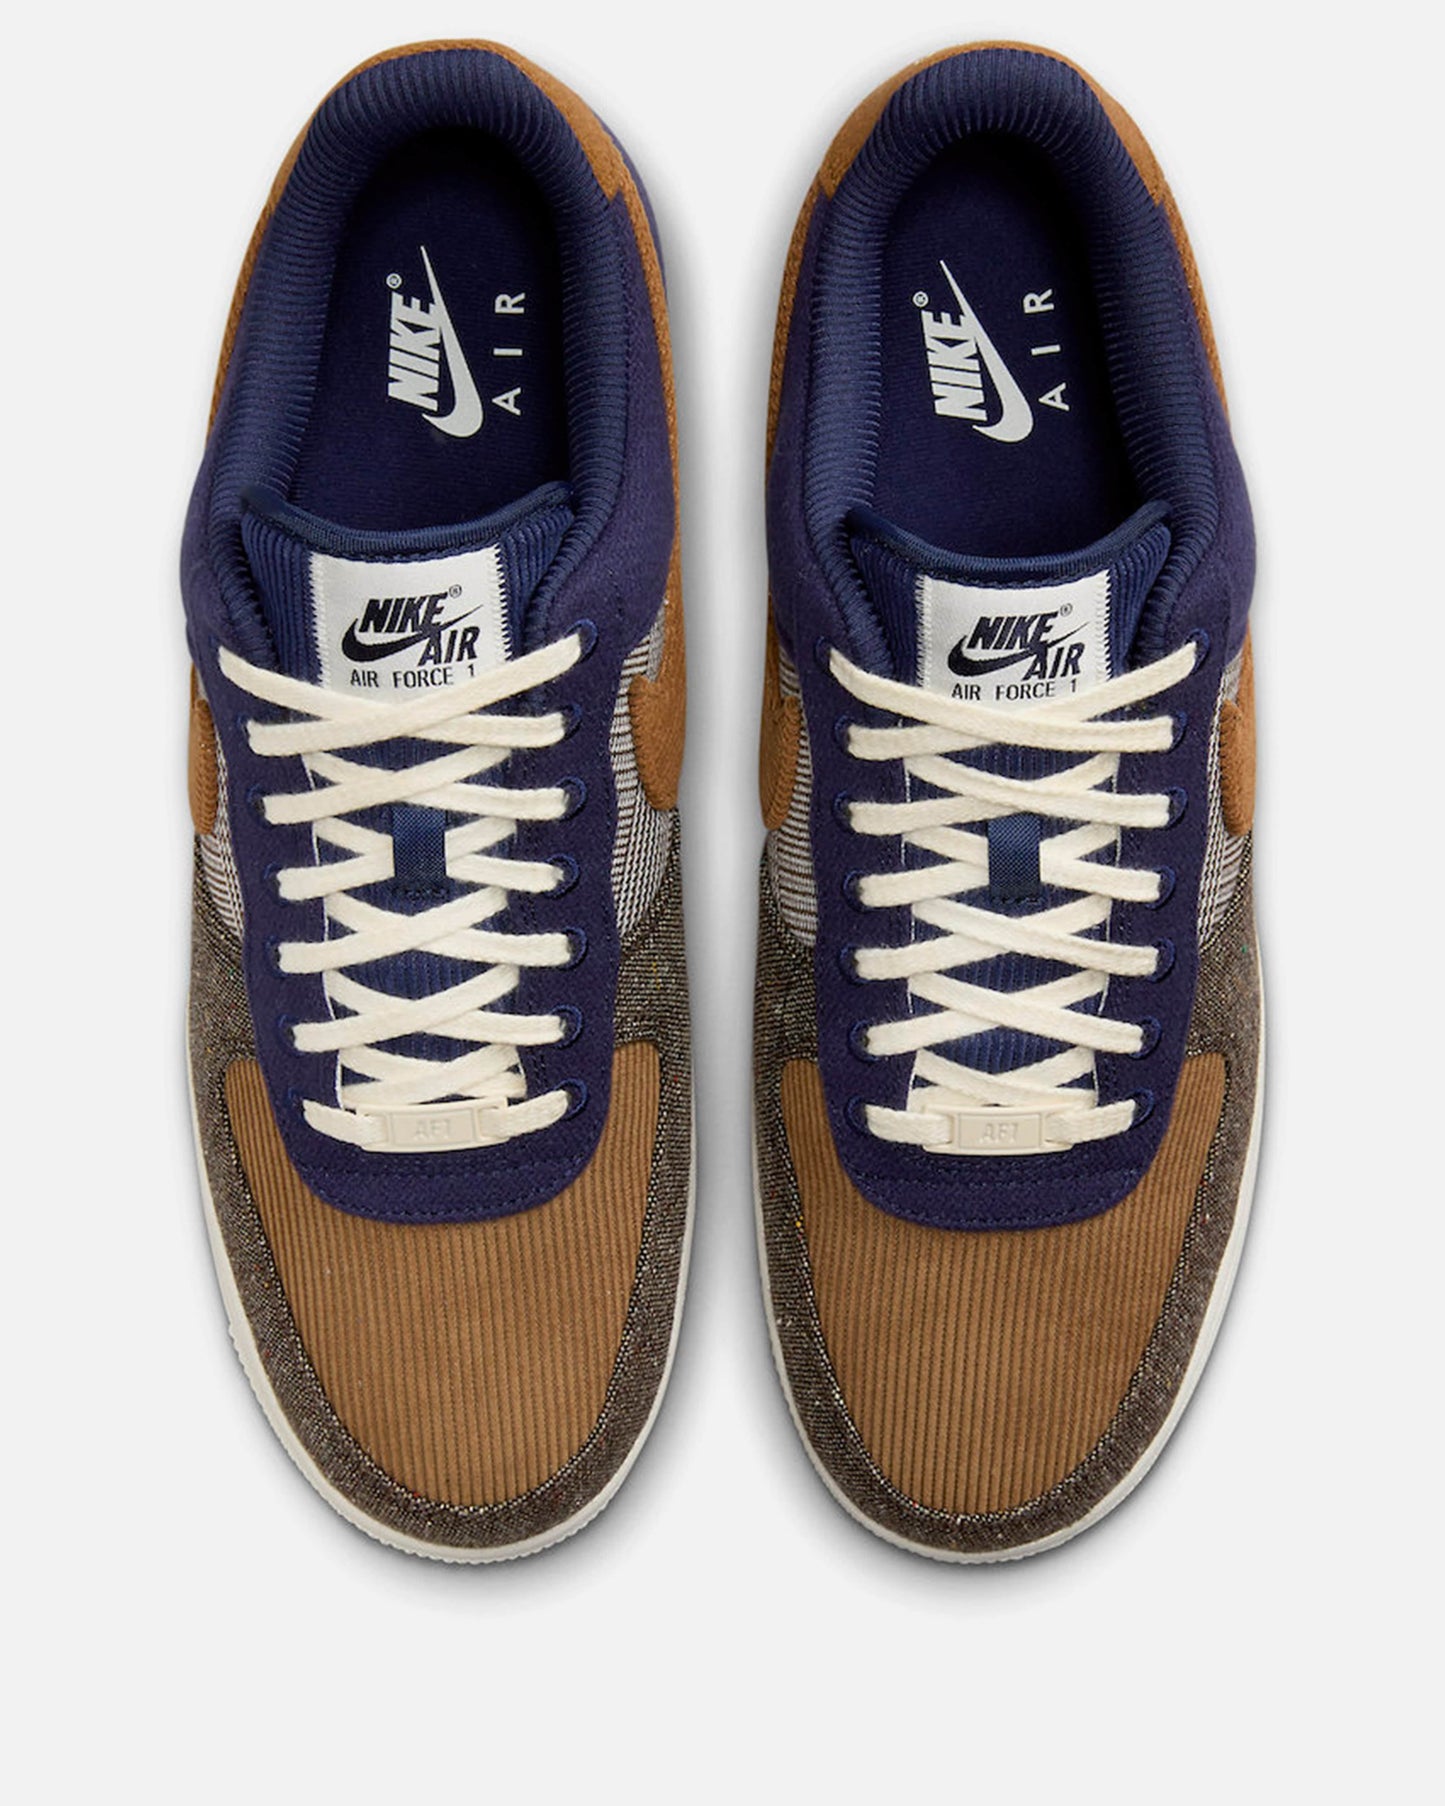 Nike Men's Shoes Air Force 1 '07 PRM 'Midnight Navy/Ale Brown'